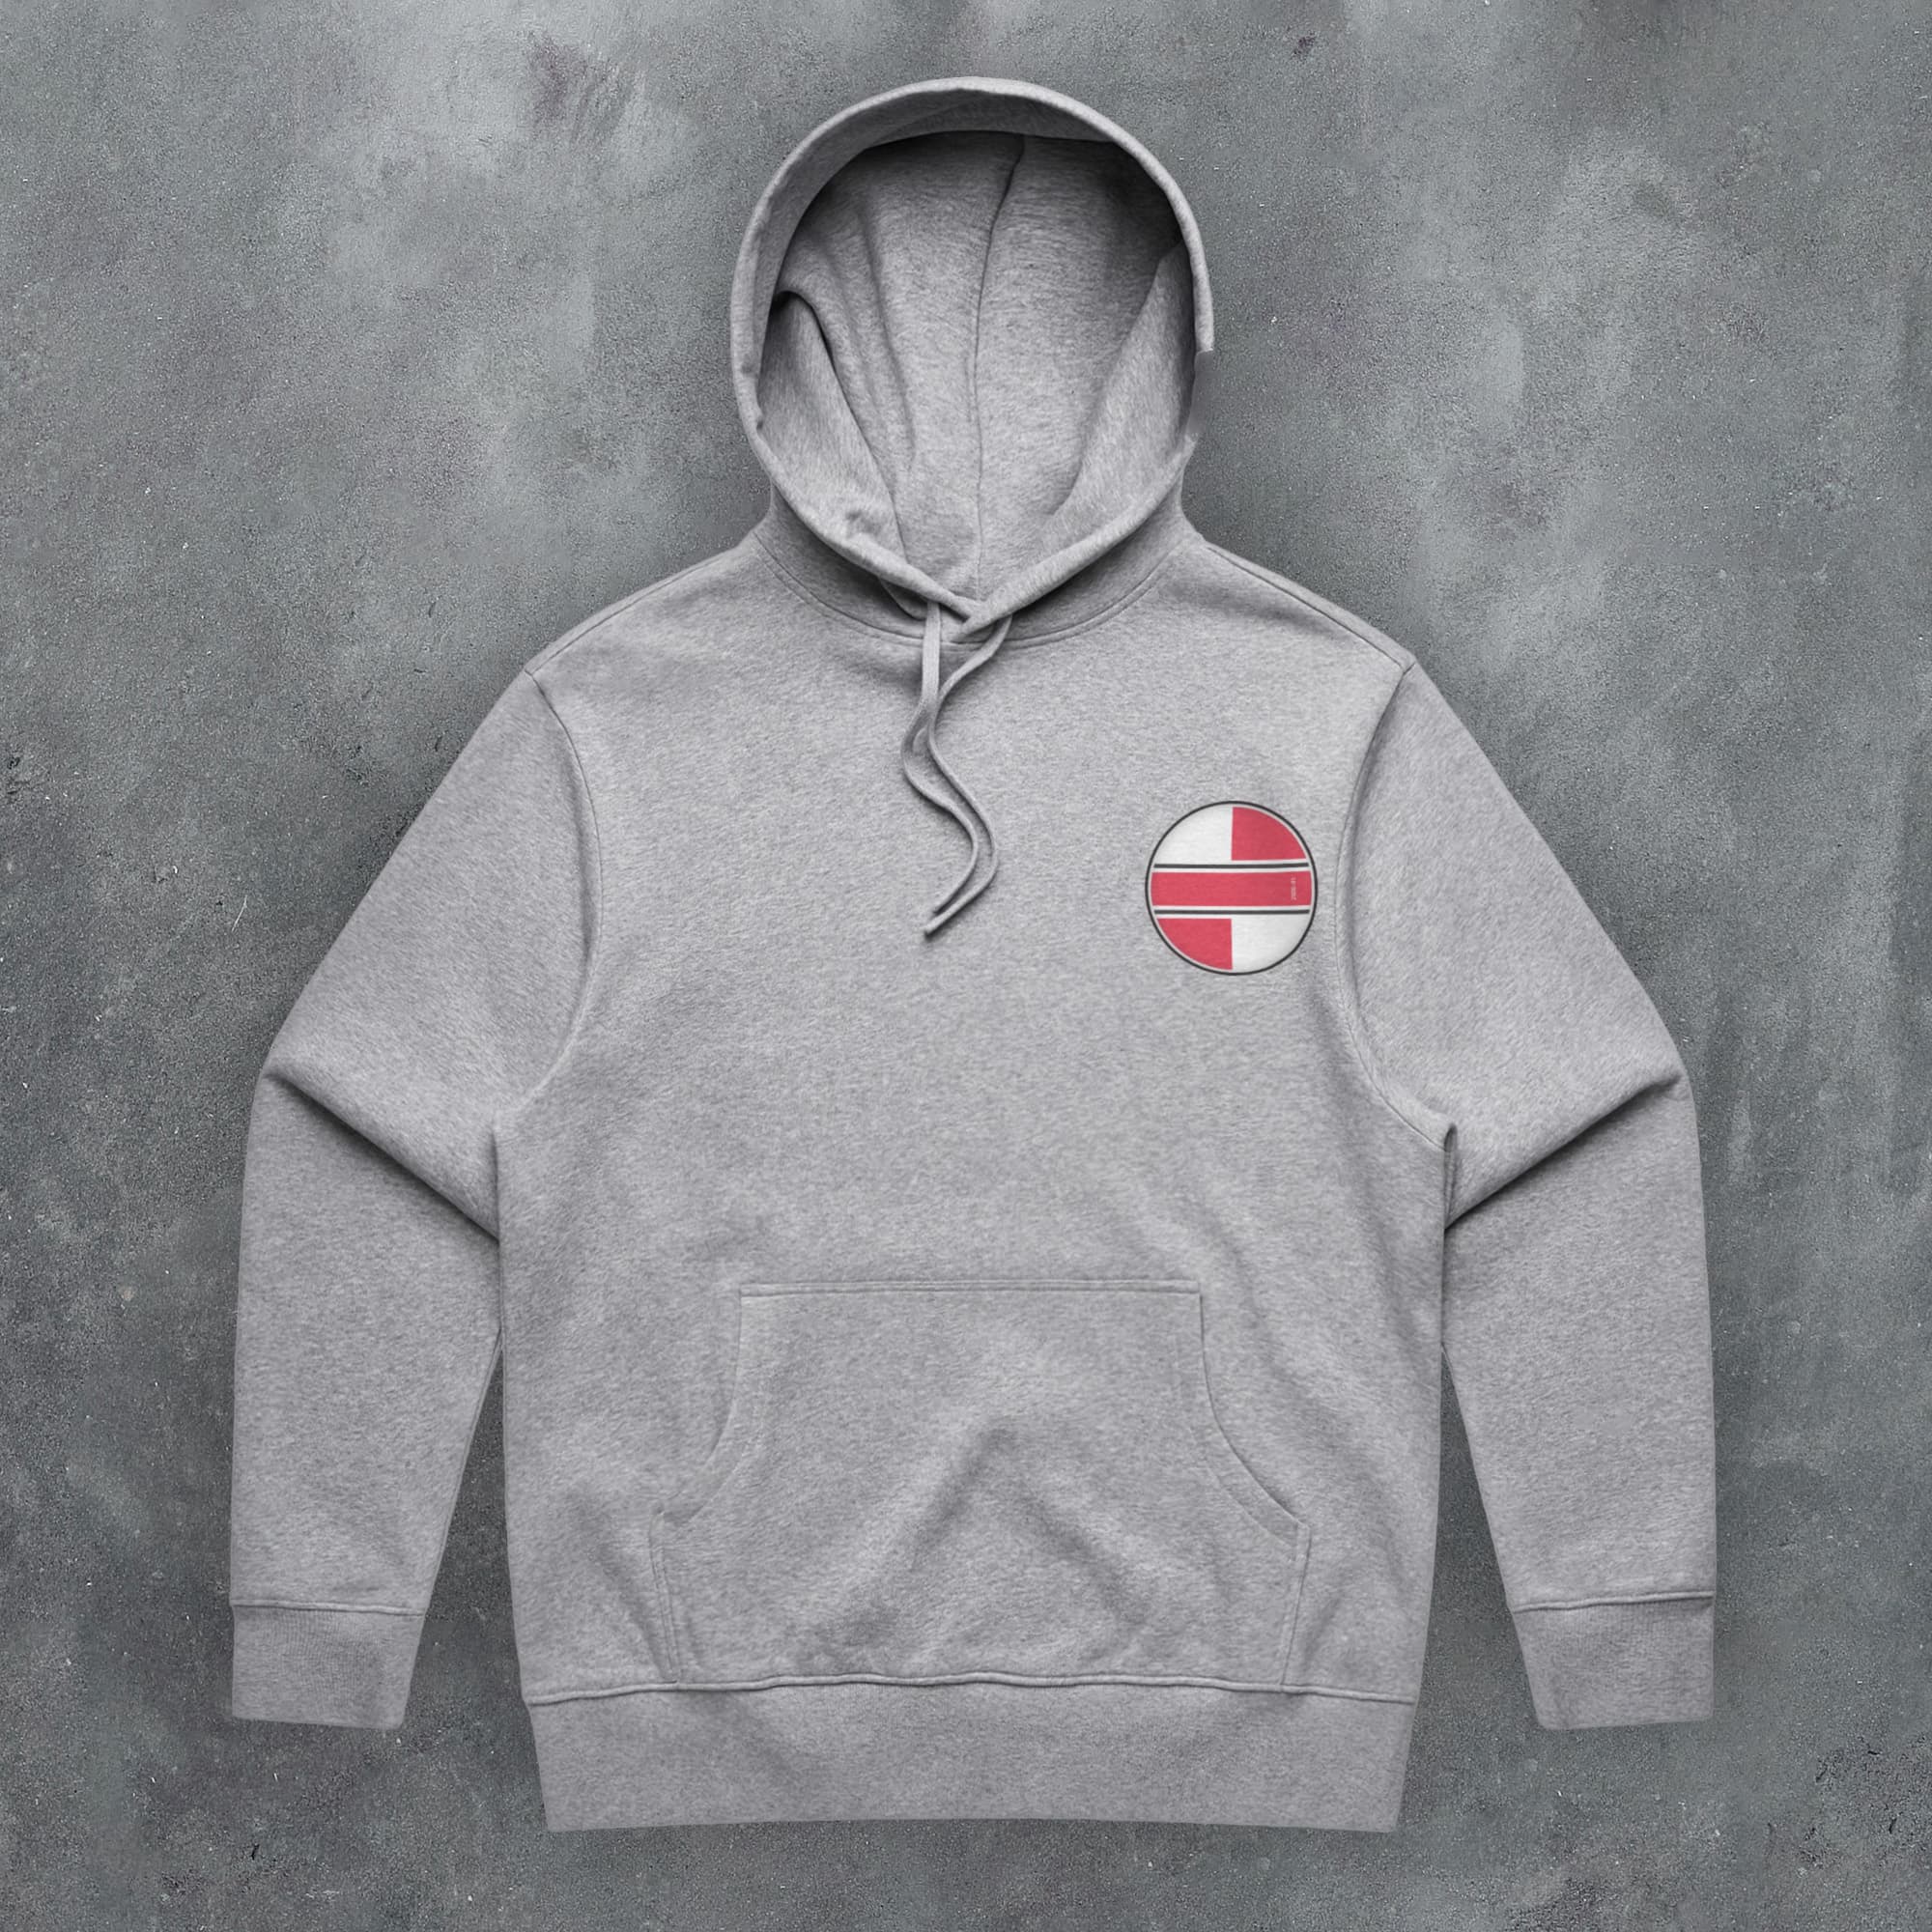 a grey hoodie with a red and white cross on it